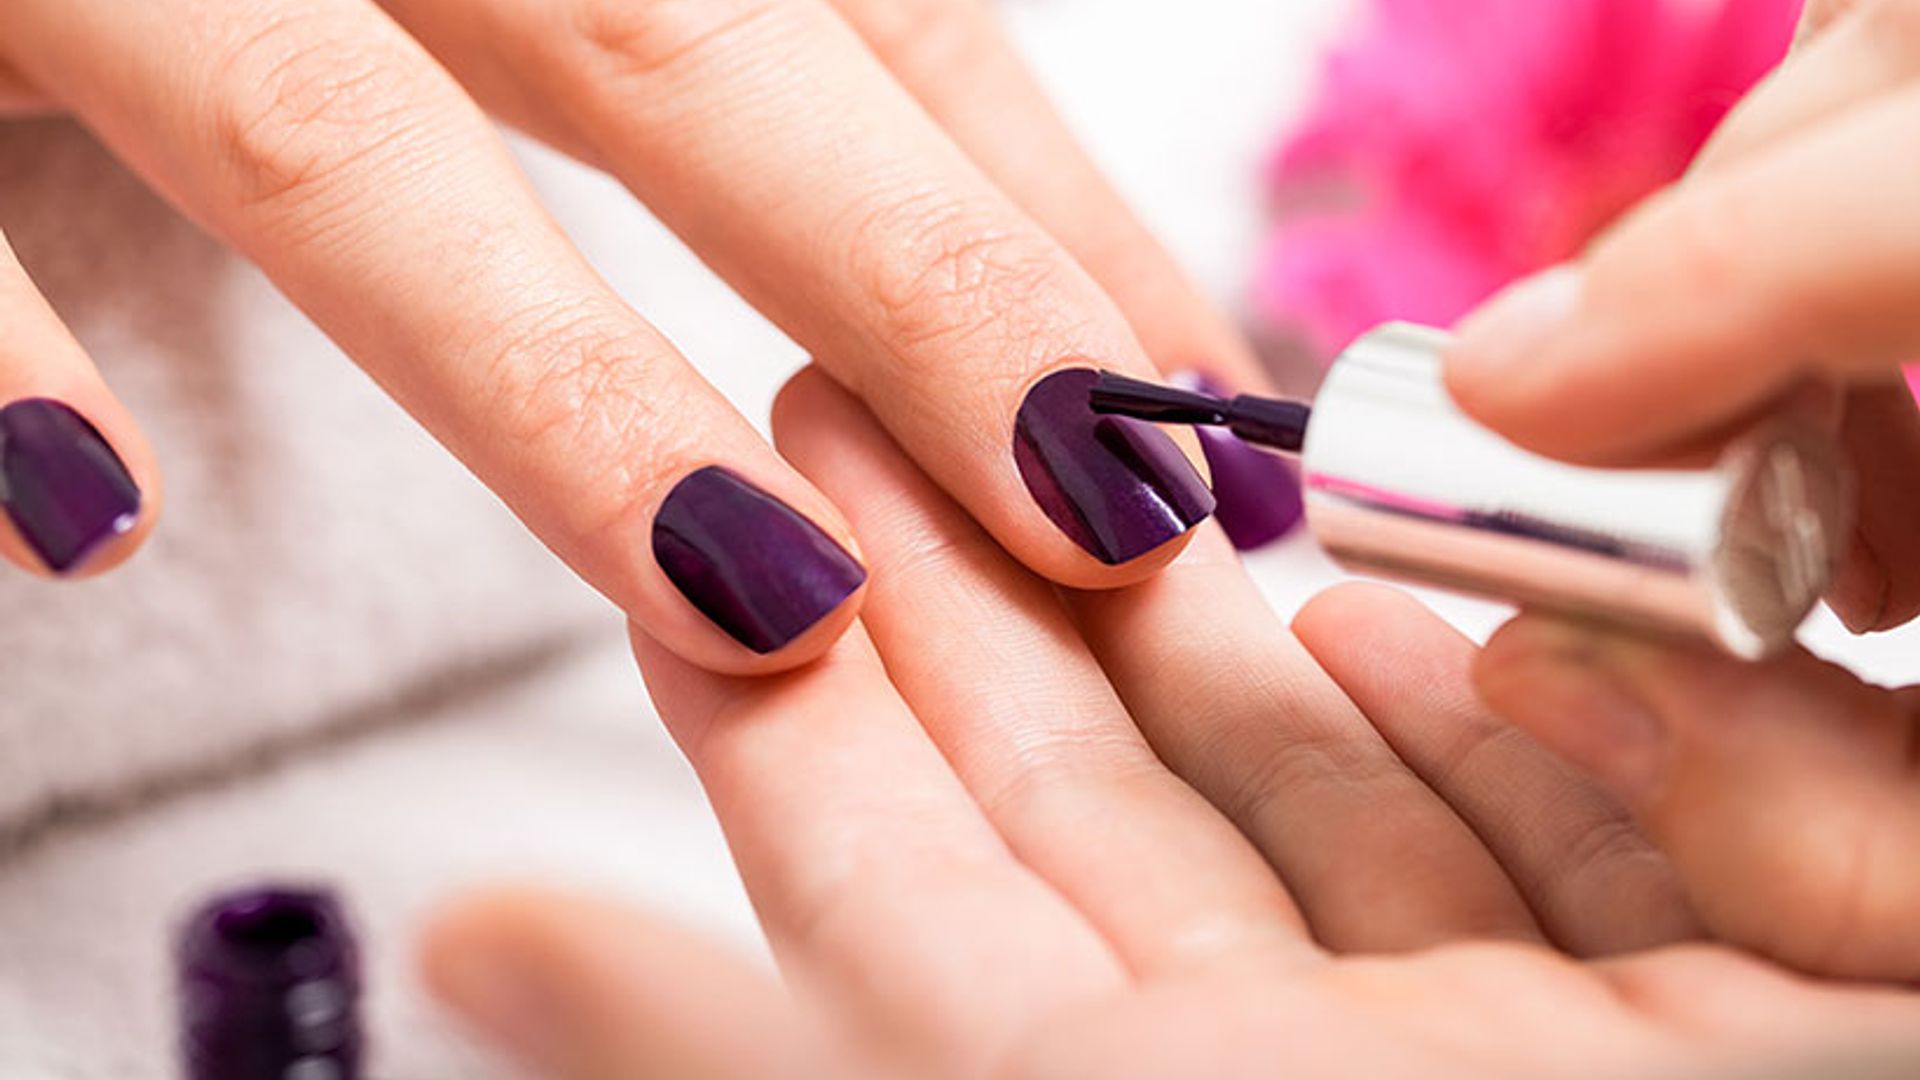 Want your manicure to last longer? These are the most common nail problems and how to avoid them